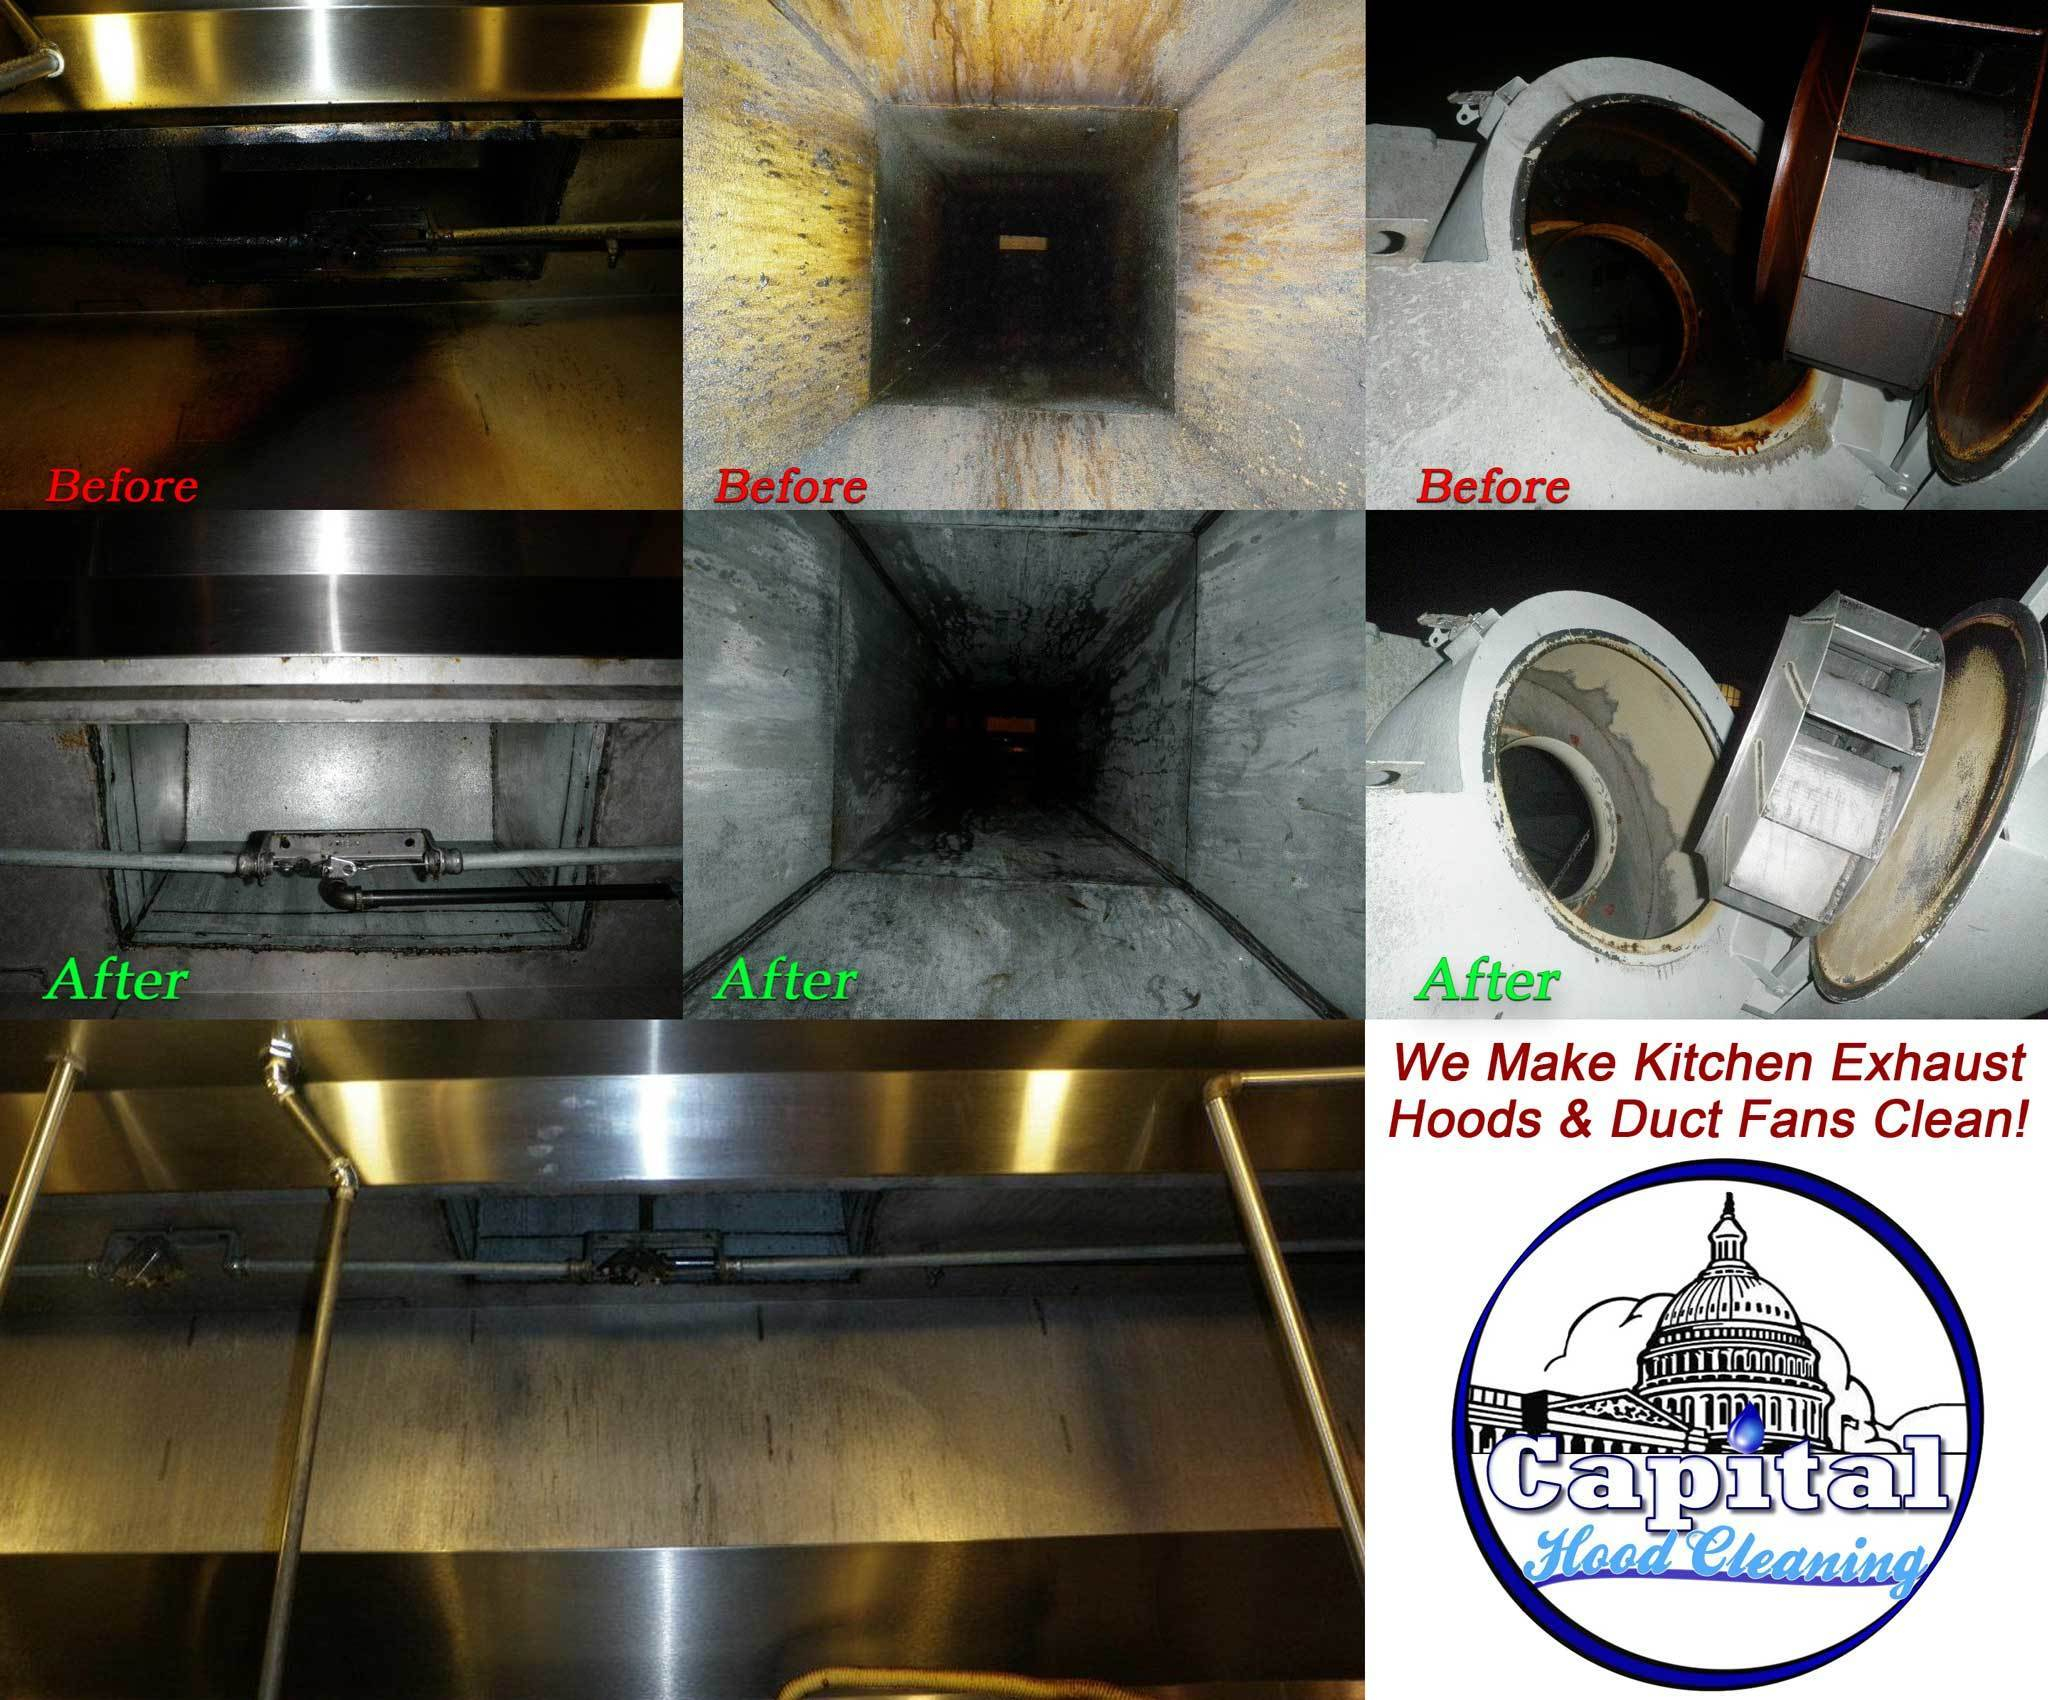 Lotus Commercial Kitchen Exhaust Hood Fan Duct Cleaning intended for dimensions 2048 X 1700